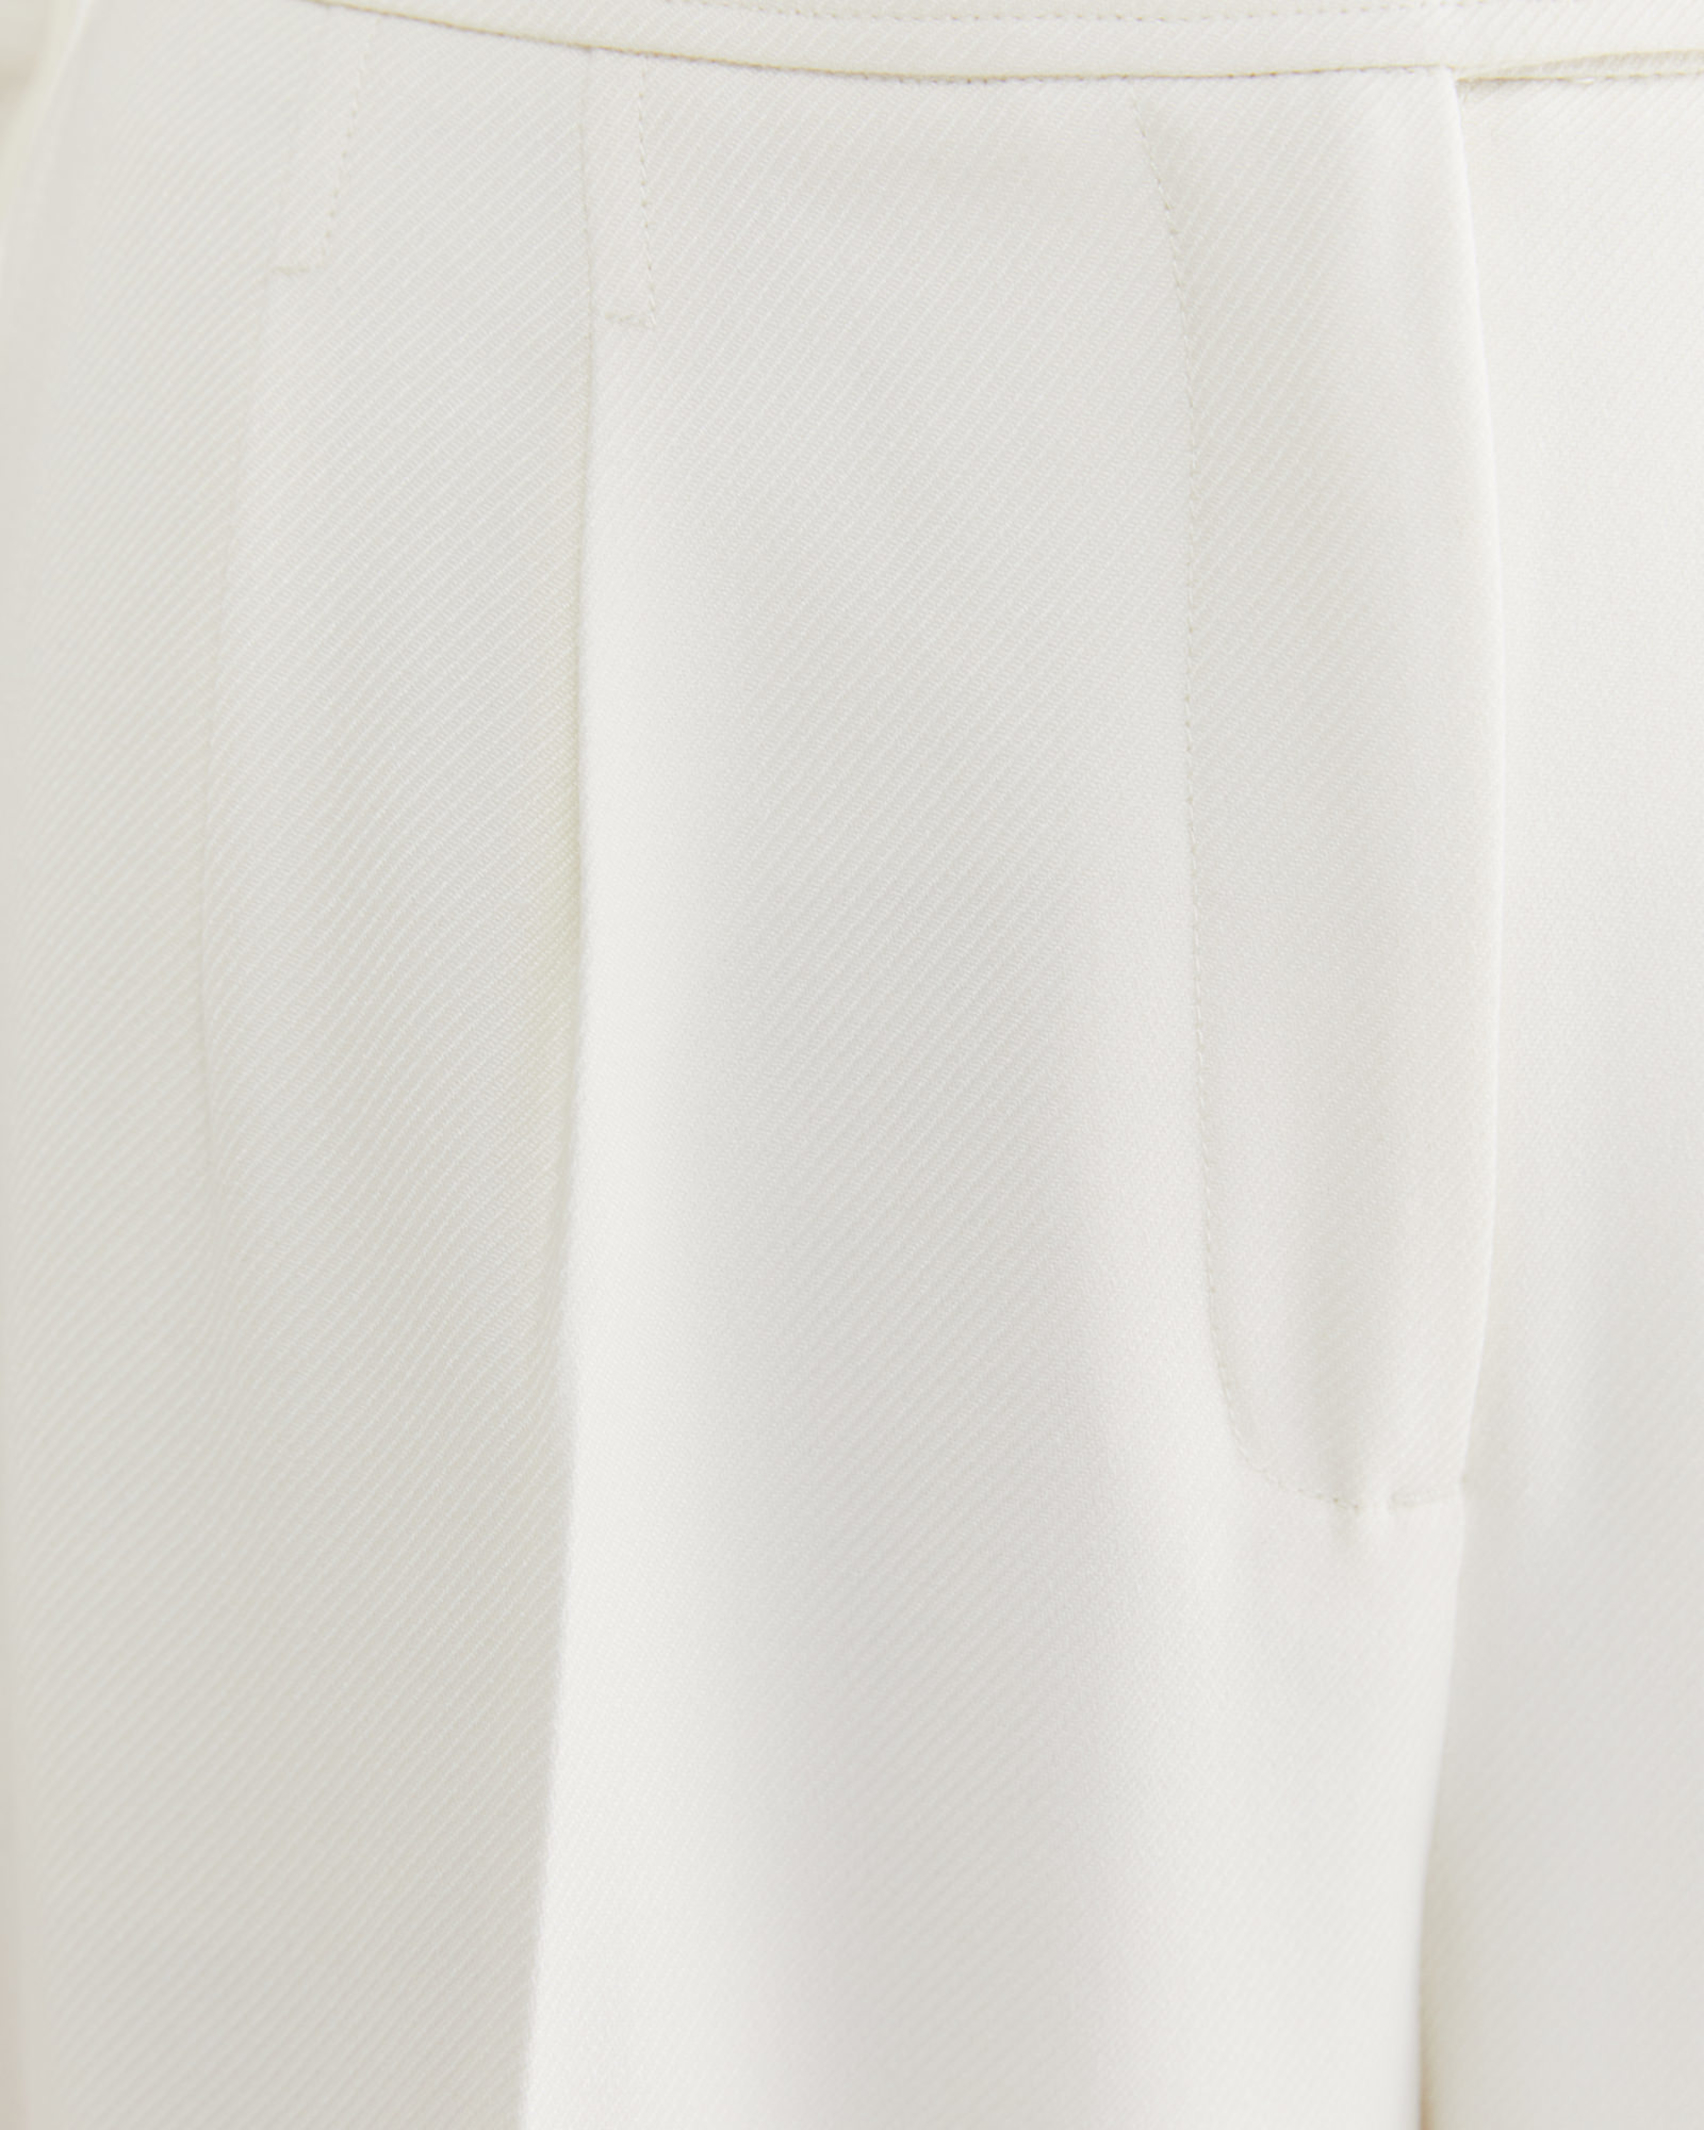 Frankie Twill Wide Leg Pant in WINTER WHITE